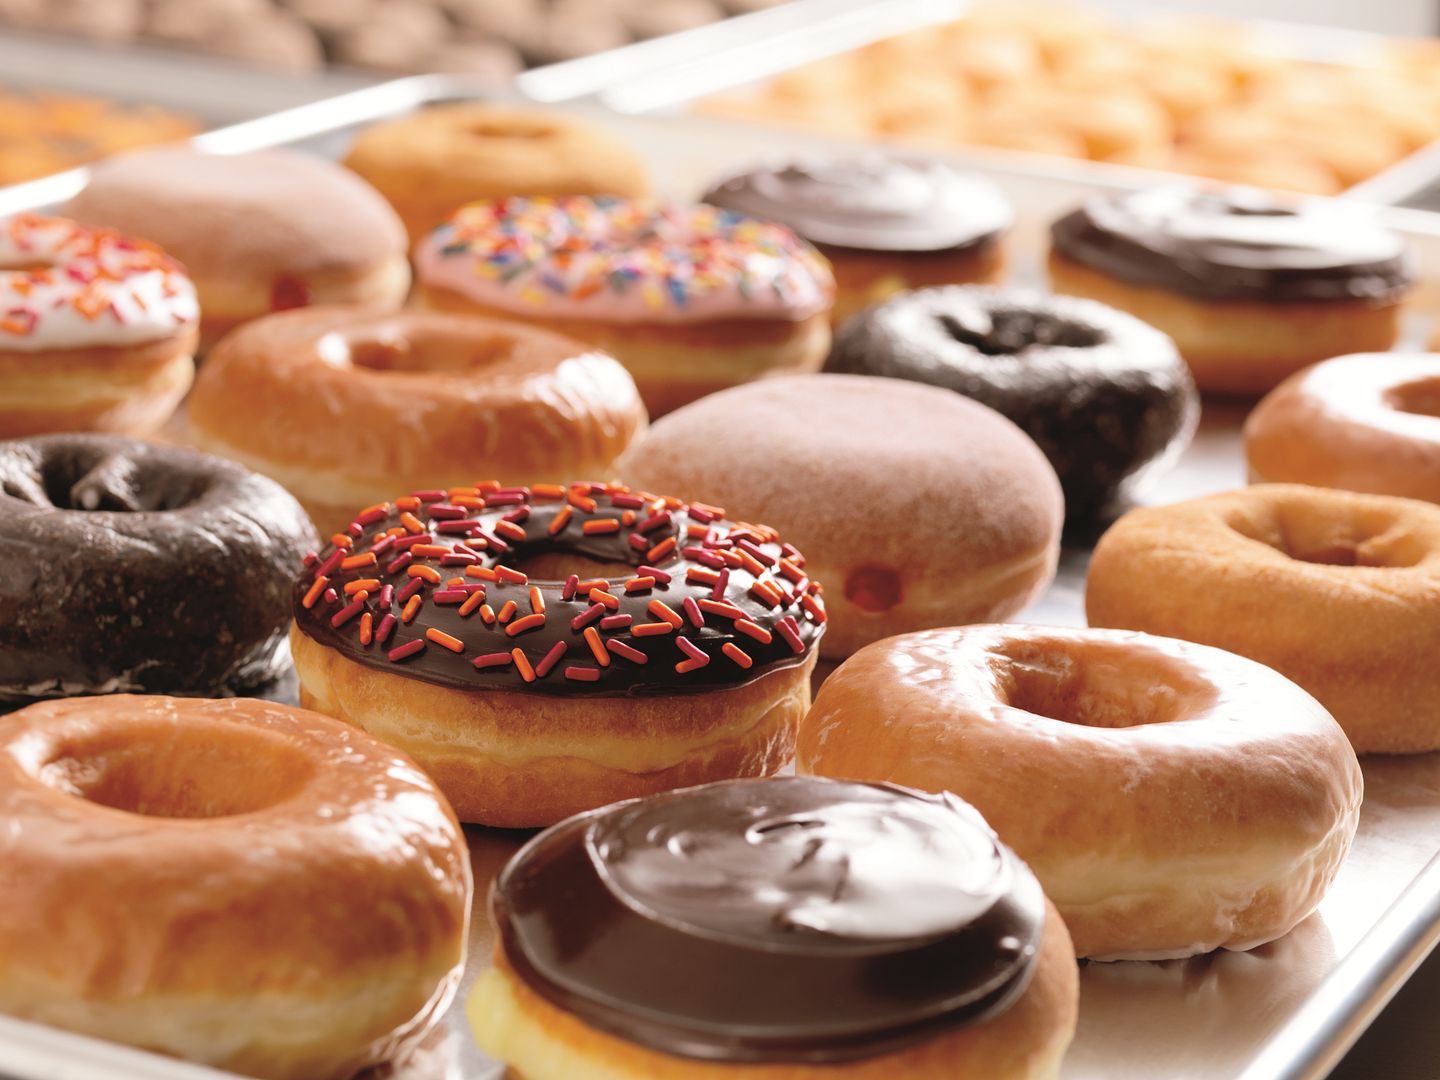 Free donuts at Dunkin' Donuts for National Donut Day